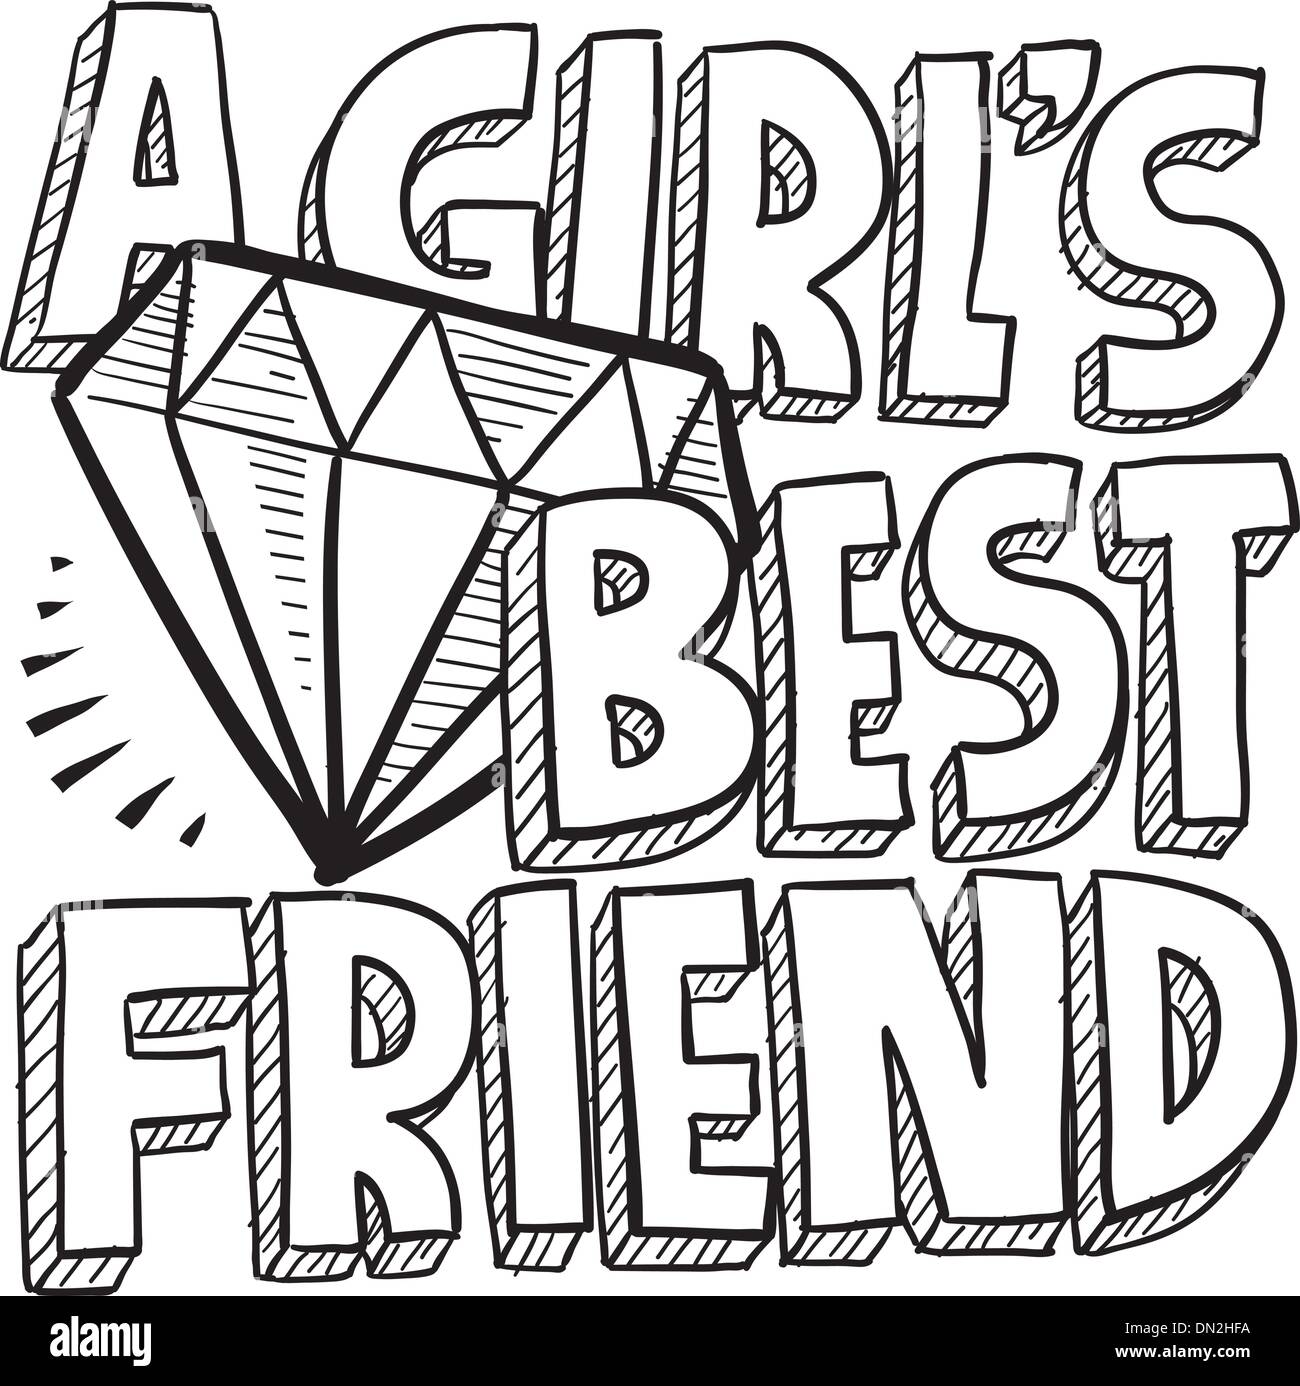 Diamonds are a girl's best friend sketch Stock Vector